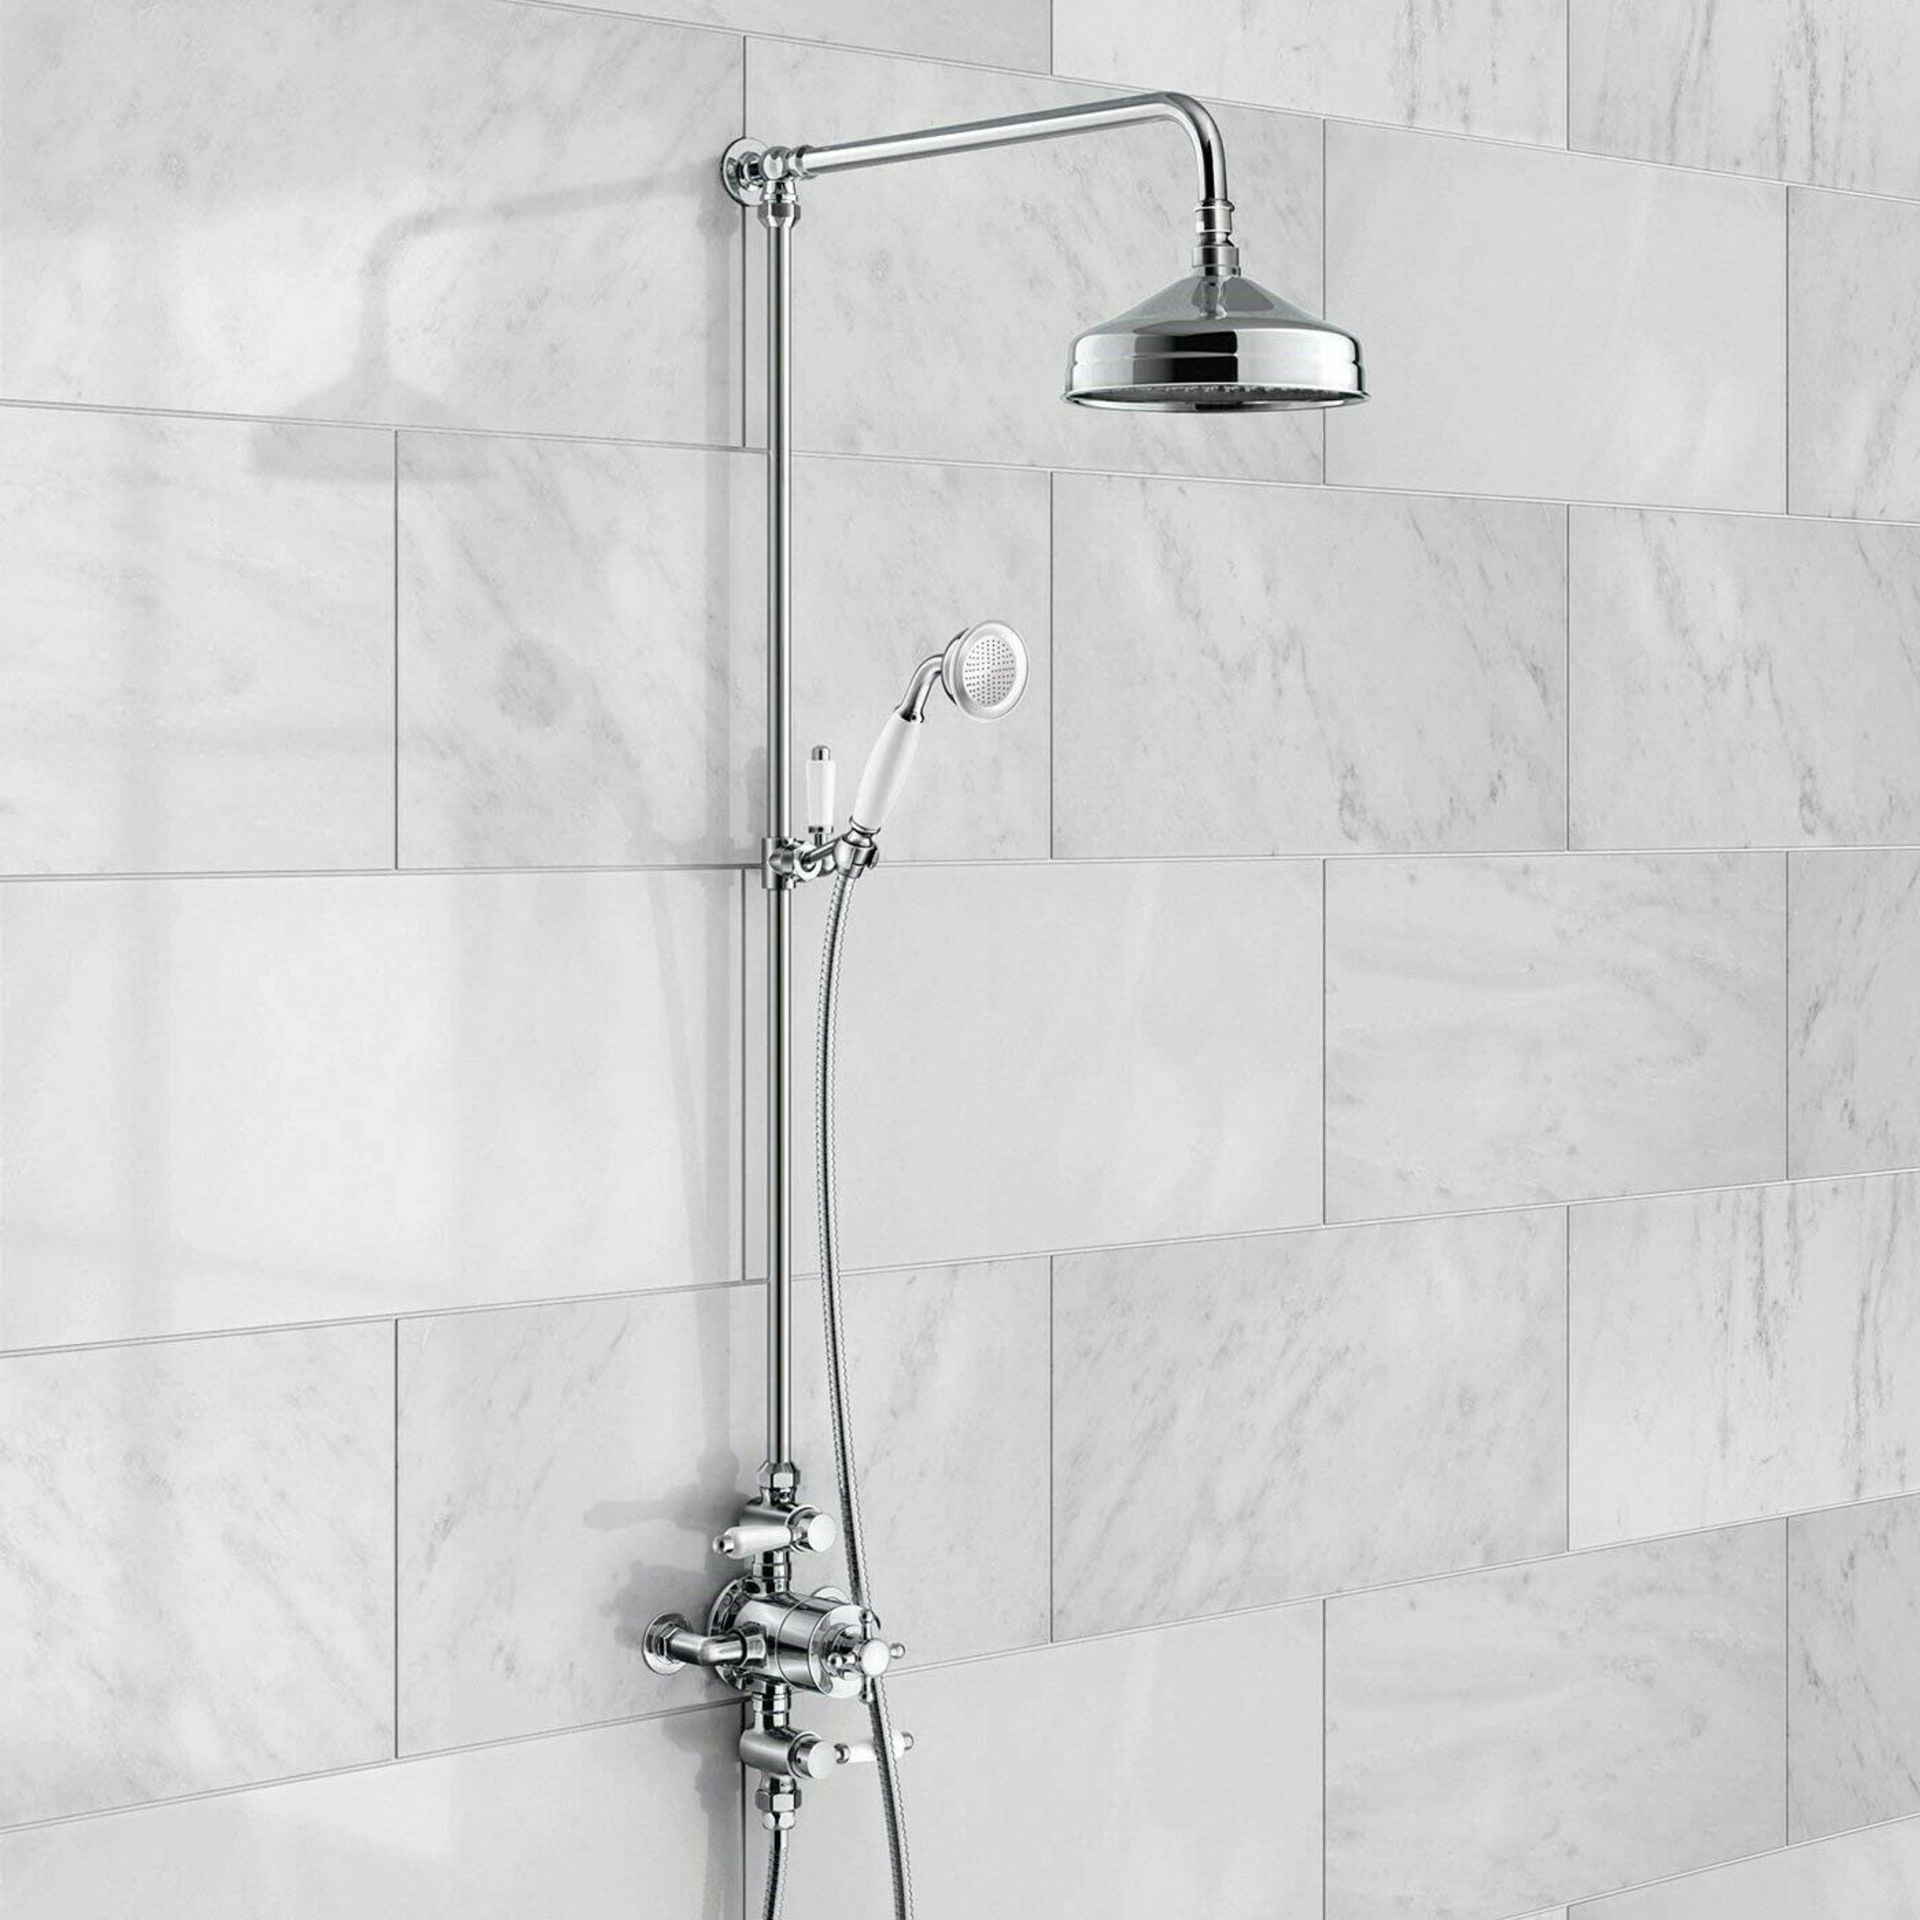 NEW (F34) Exposed Dual Traditional Thermostatic Shower Mixer + Rigid Riser + Diverter. RRP £49... - Image 2 of 3